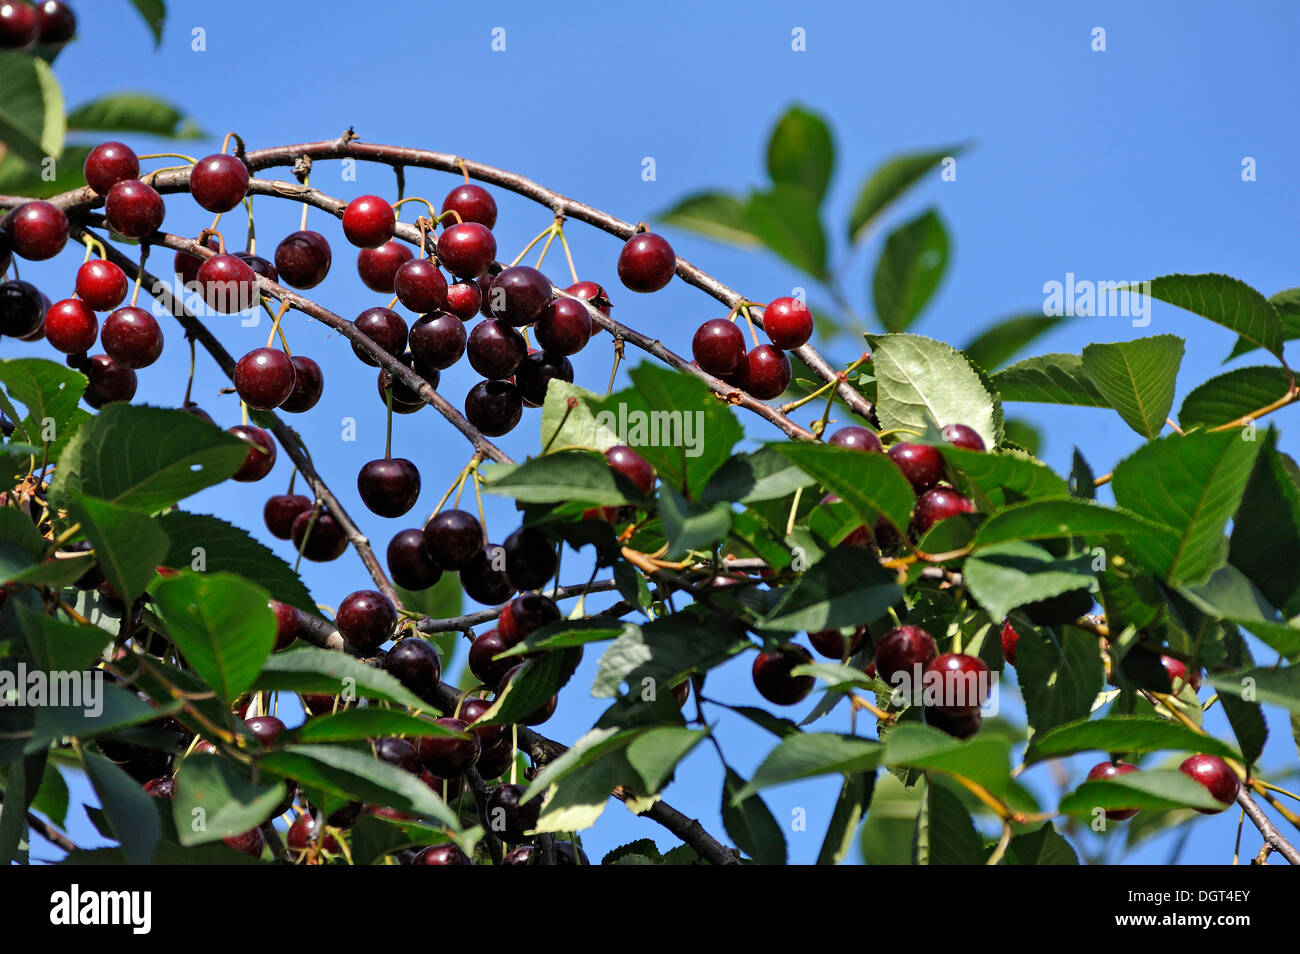 Ripe Sour cherries (Prunus cerasus) on a tree against a blue sky, Schnaittach, Middle Franconia, Bavaria Stock Photo